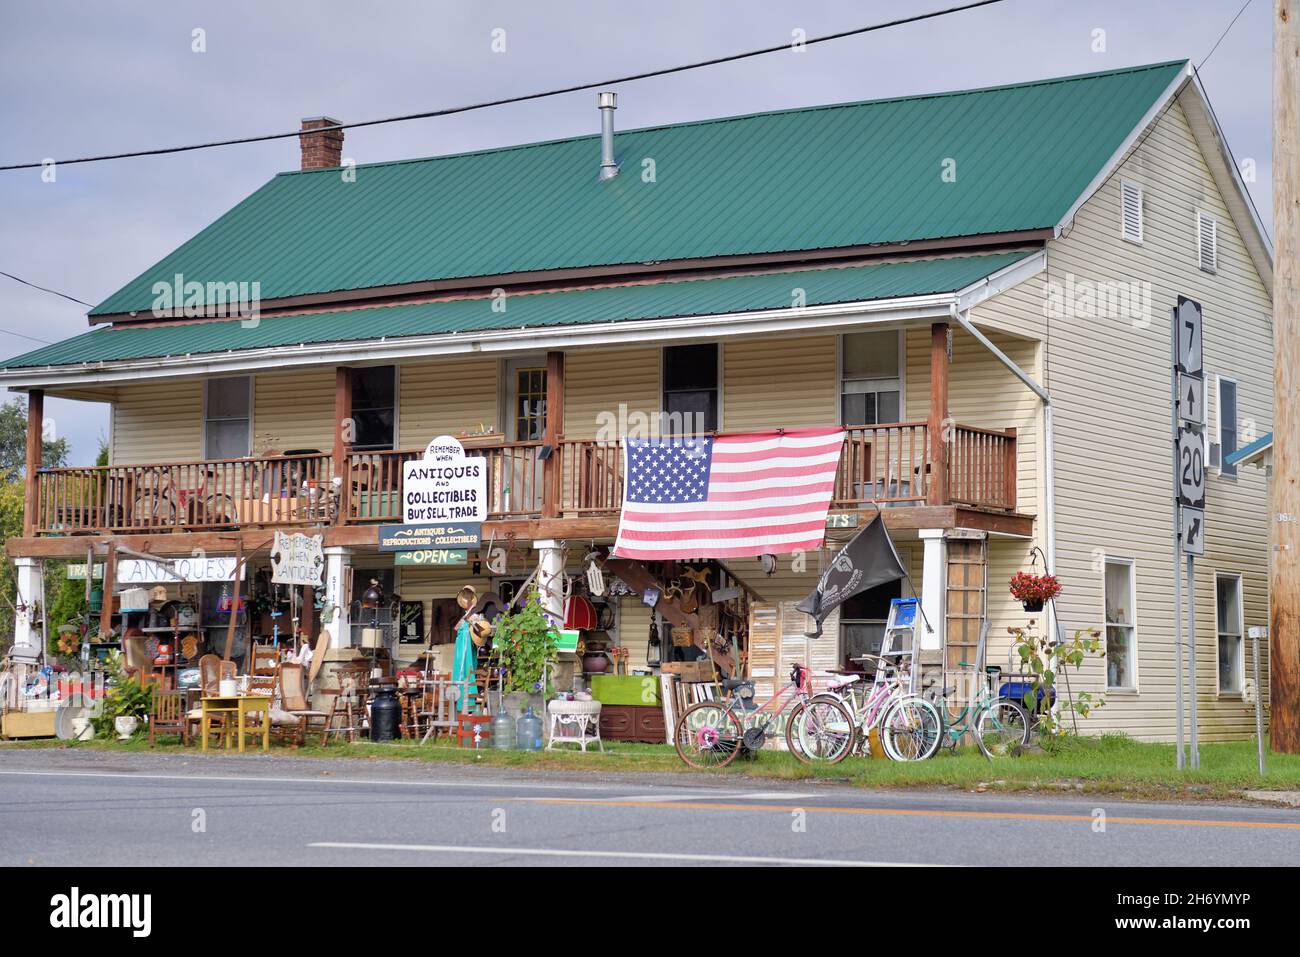 Duanesburg, New York, USA. An antique shope along the roadway in the small upstate New York community of Duanesburg. Stock Photo